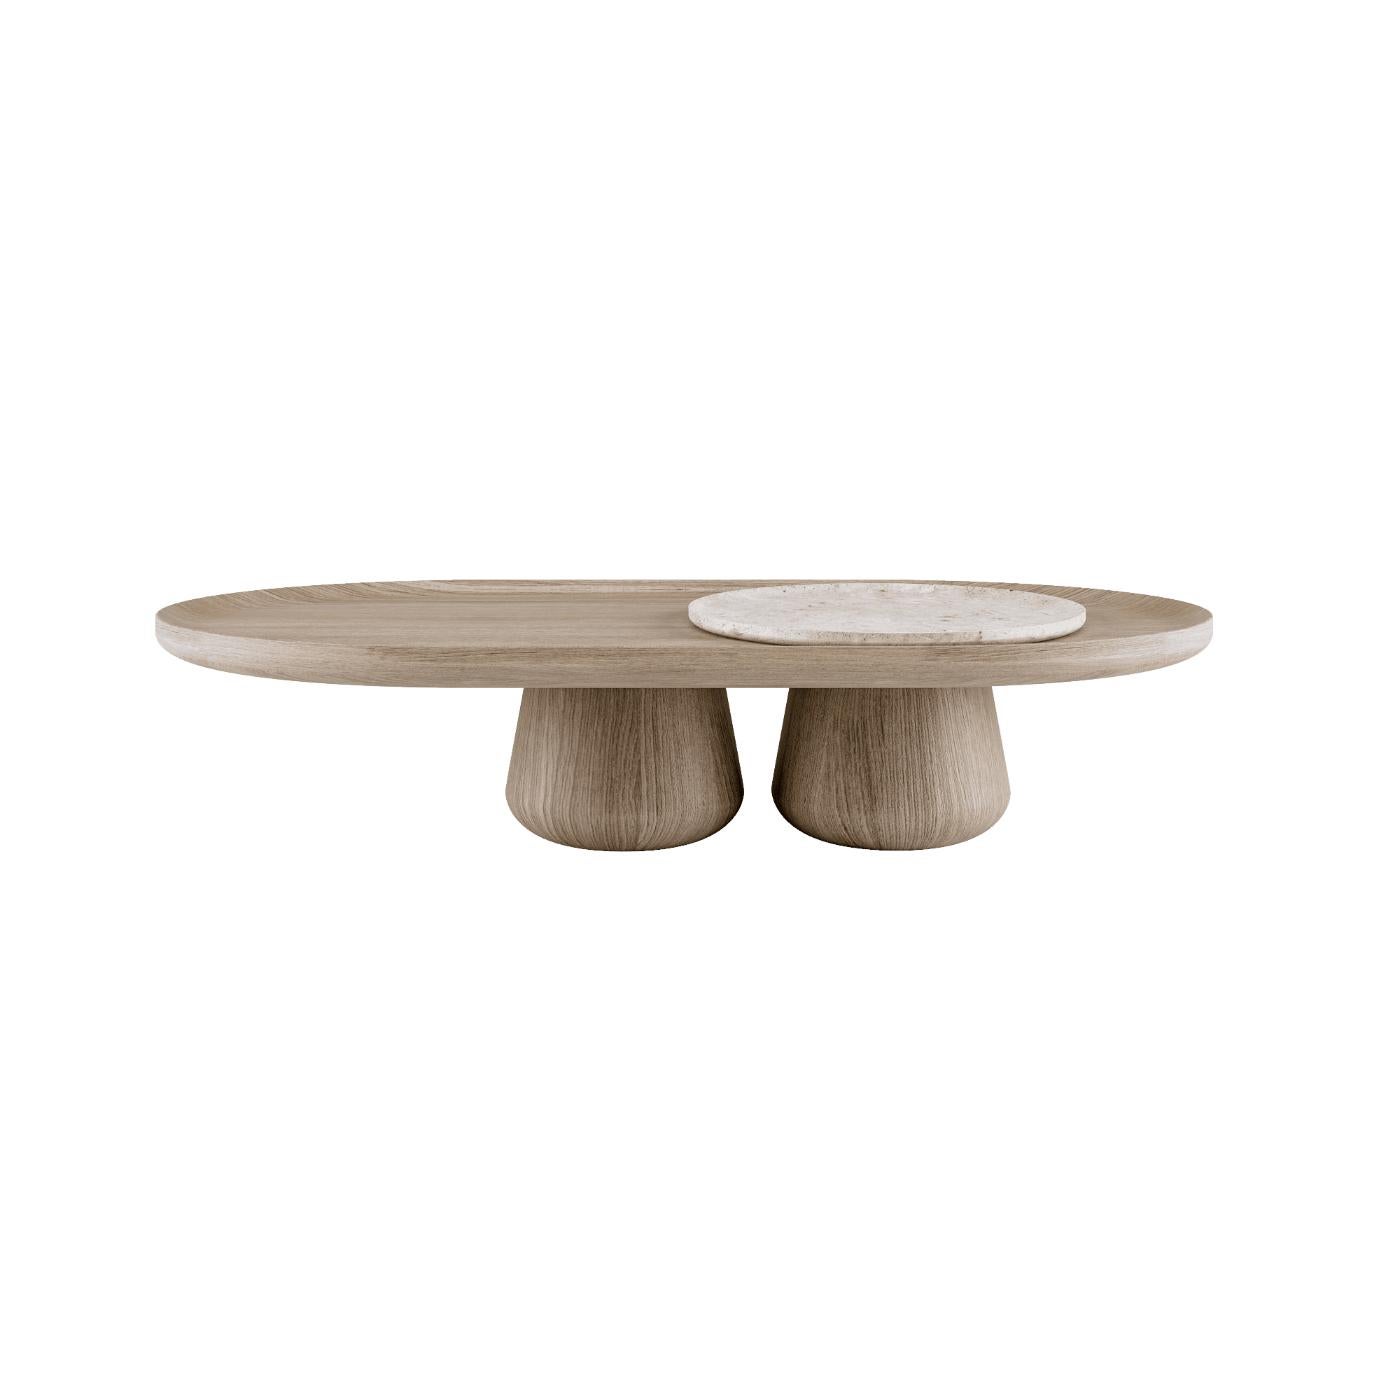 Large Crema Marfil Bold Coffee Table by Mohdern
Dimensions: W 140 x D 80 x H 30 cm (Marble Tray Included ⌀ 52 cm)
Materials: Solid Ash


Bold is a refined collection of coffee tables designed and produced by the Mohdern brand. Available in three